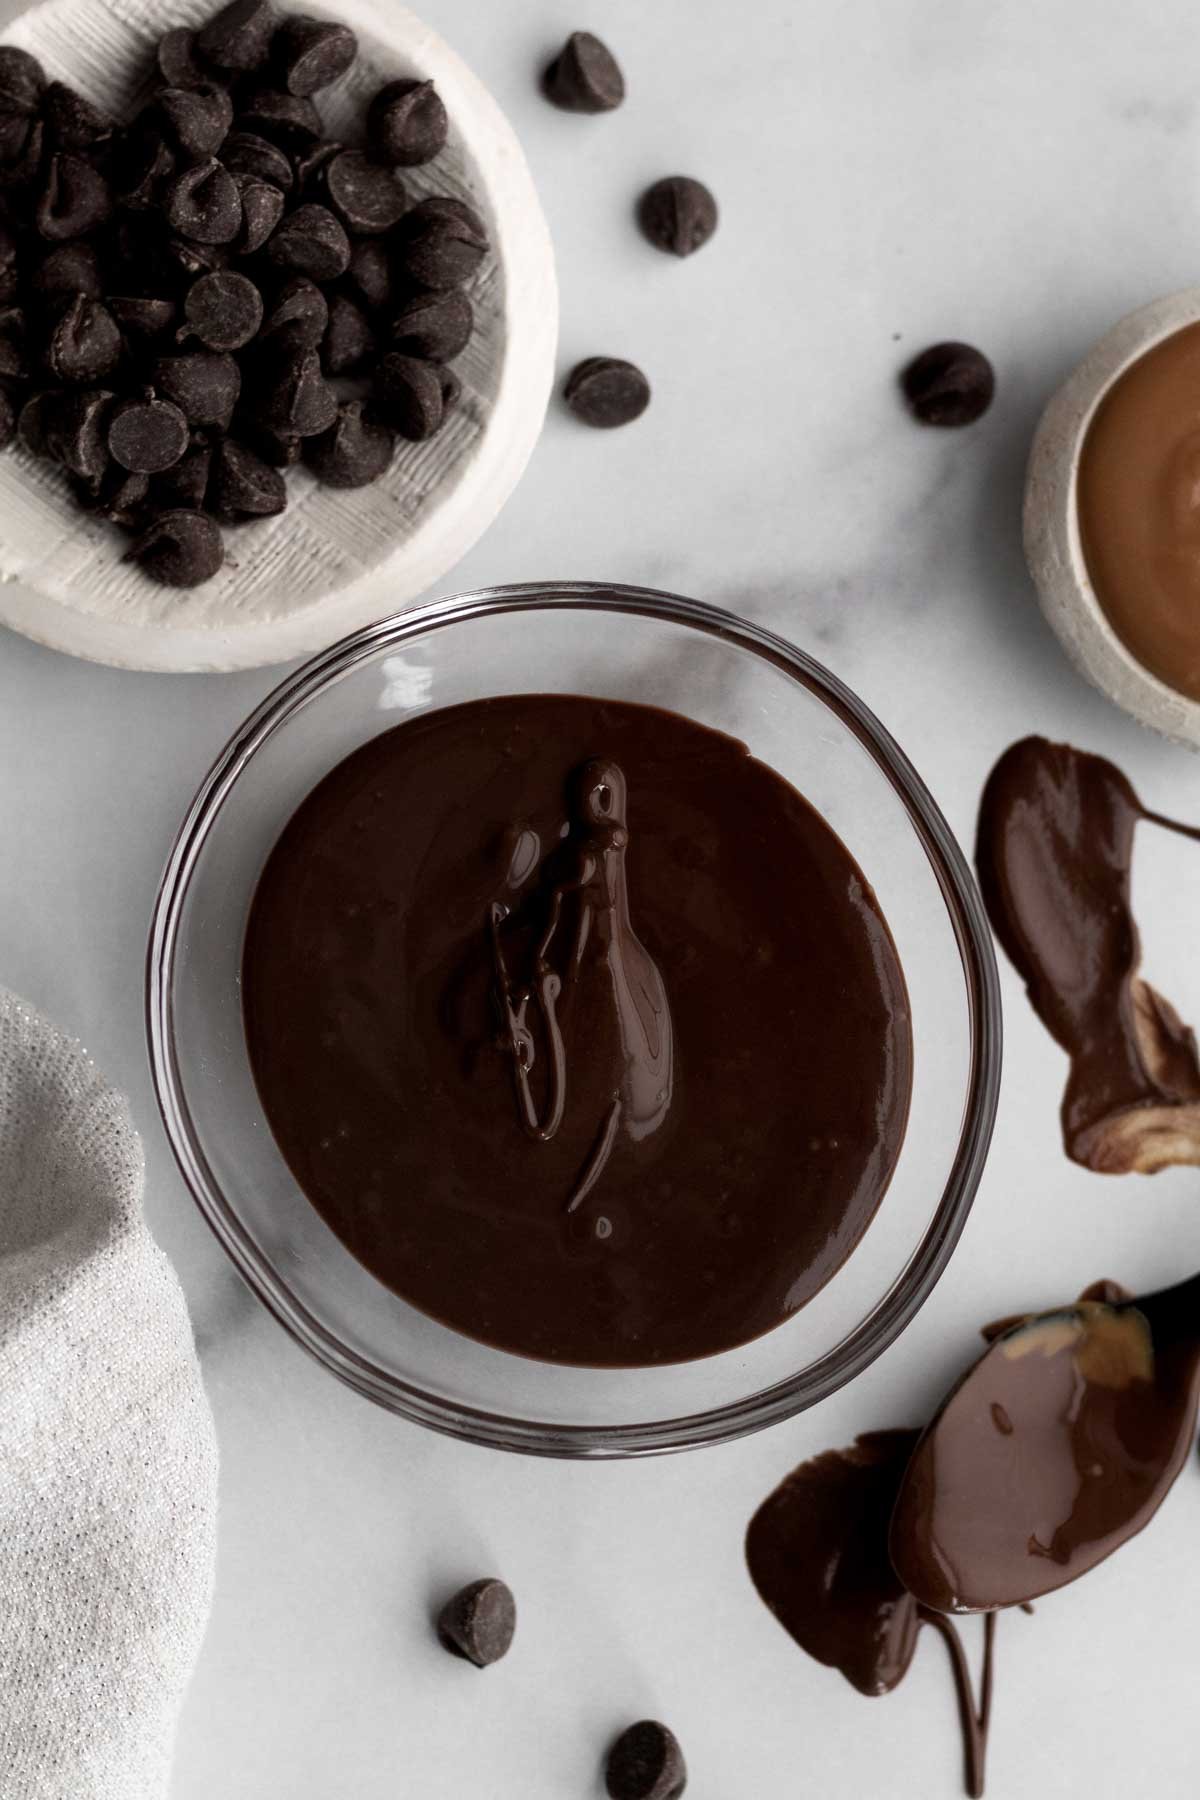 Dark and creamy Nut Free Chocolate Spread in a glass bowl.